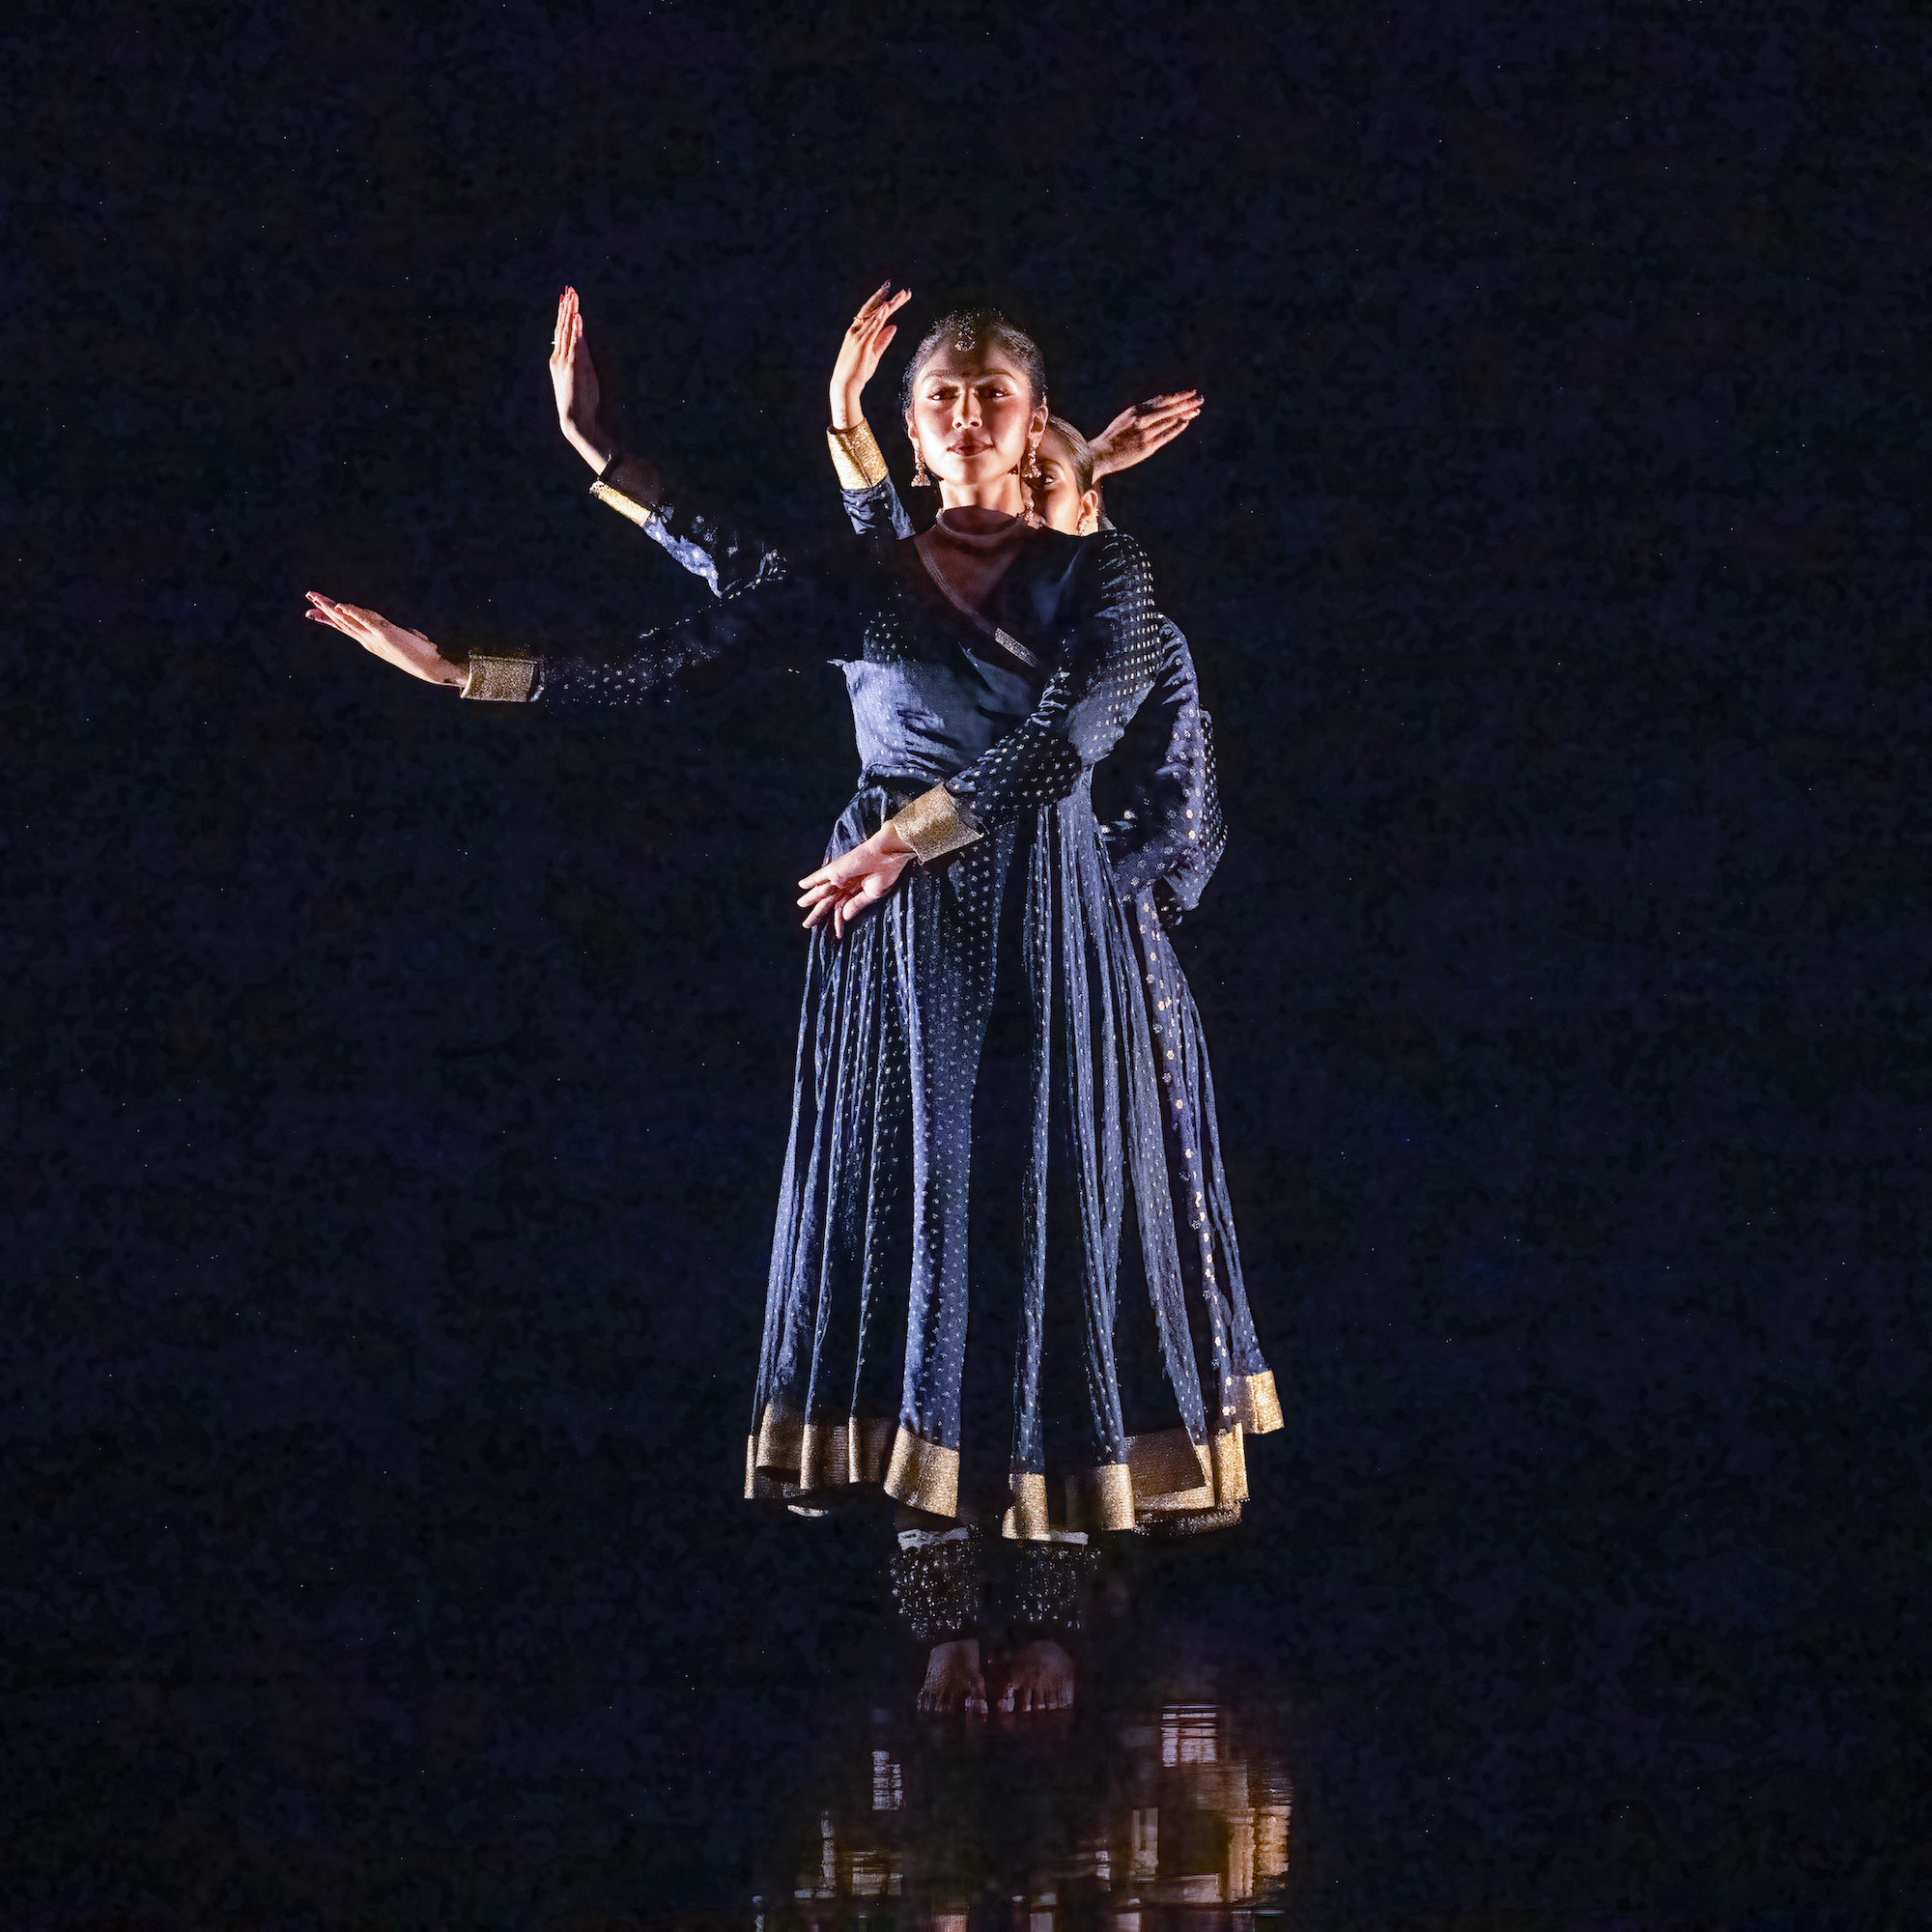 Shruti Pai from Chitresh Das Dance faces forward in “Sangam” from “Invoking the River”